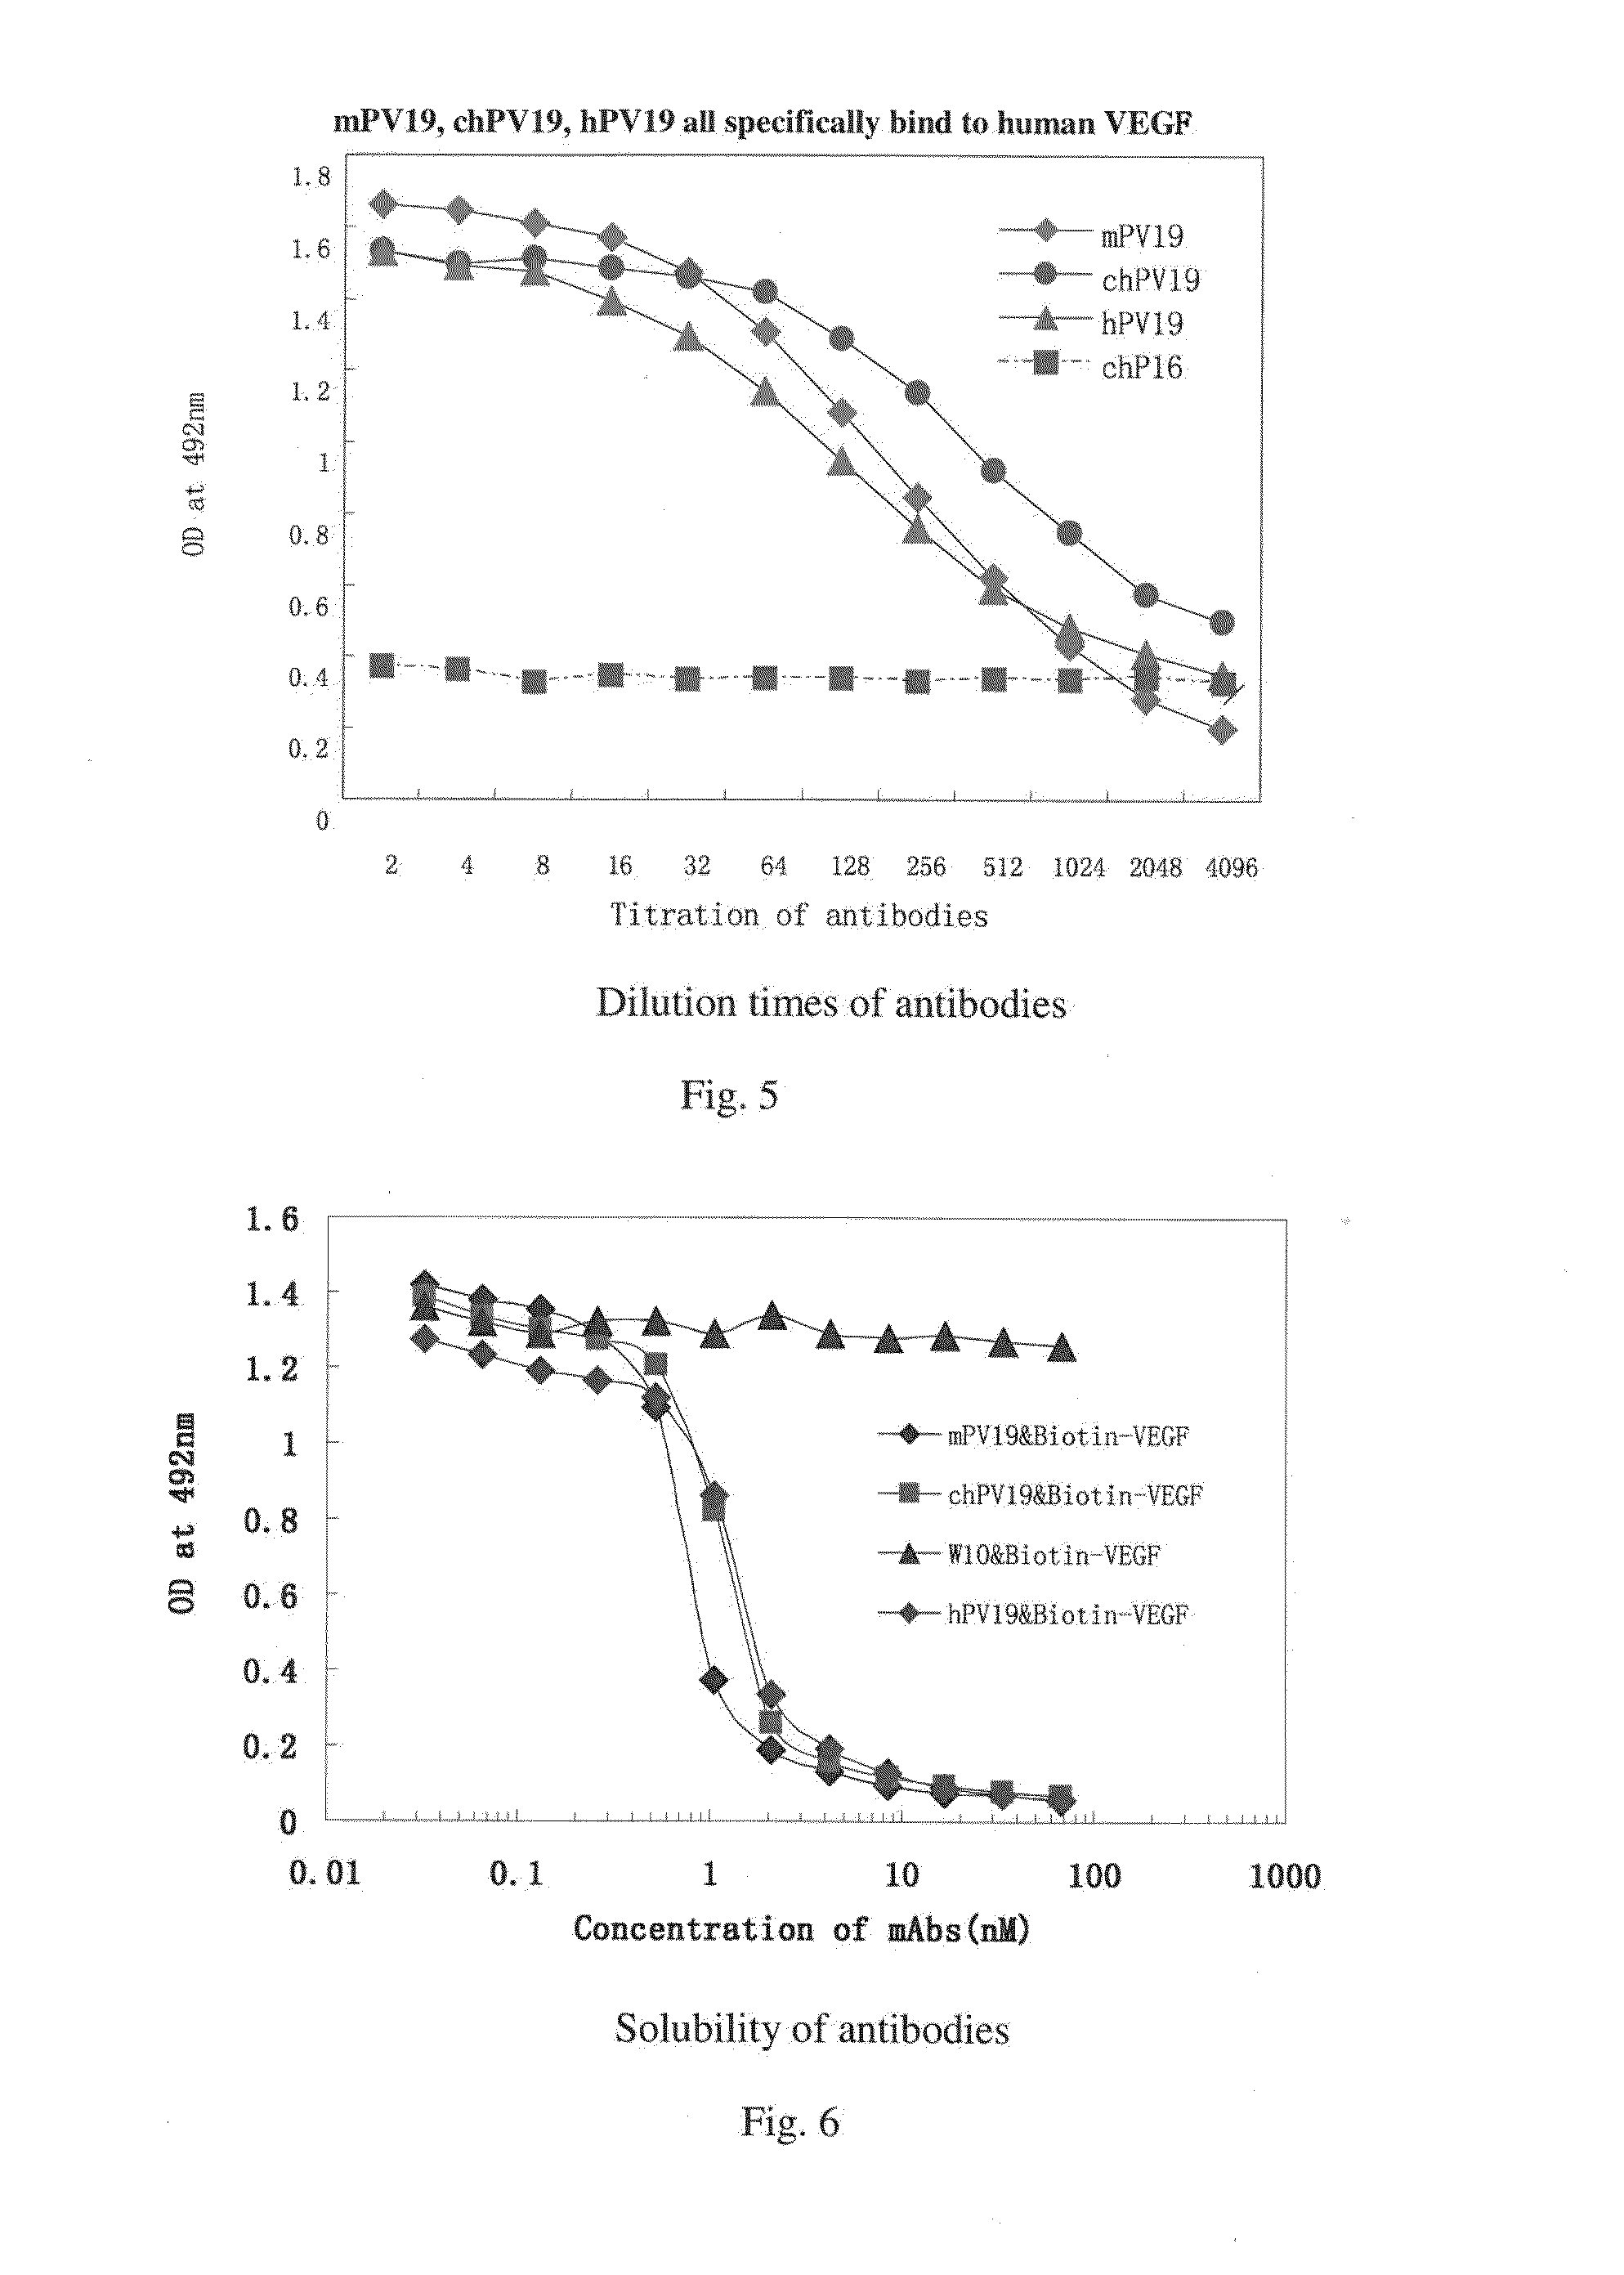 Monoclonal antibody for antagonizing and inhibiting binding of vascular endothelial cell growth factor and its receptor, and coding sequence and use thereof